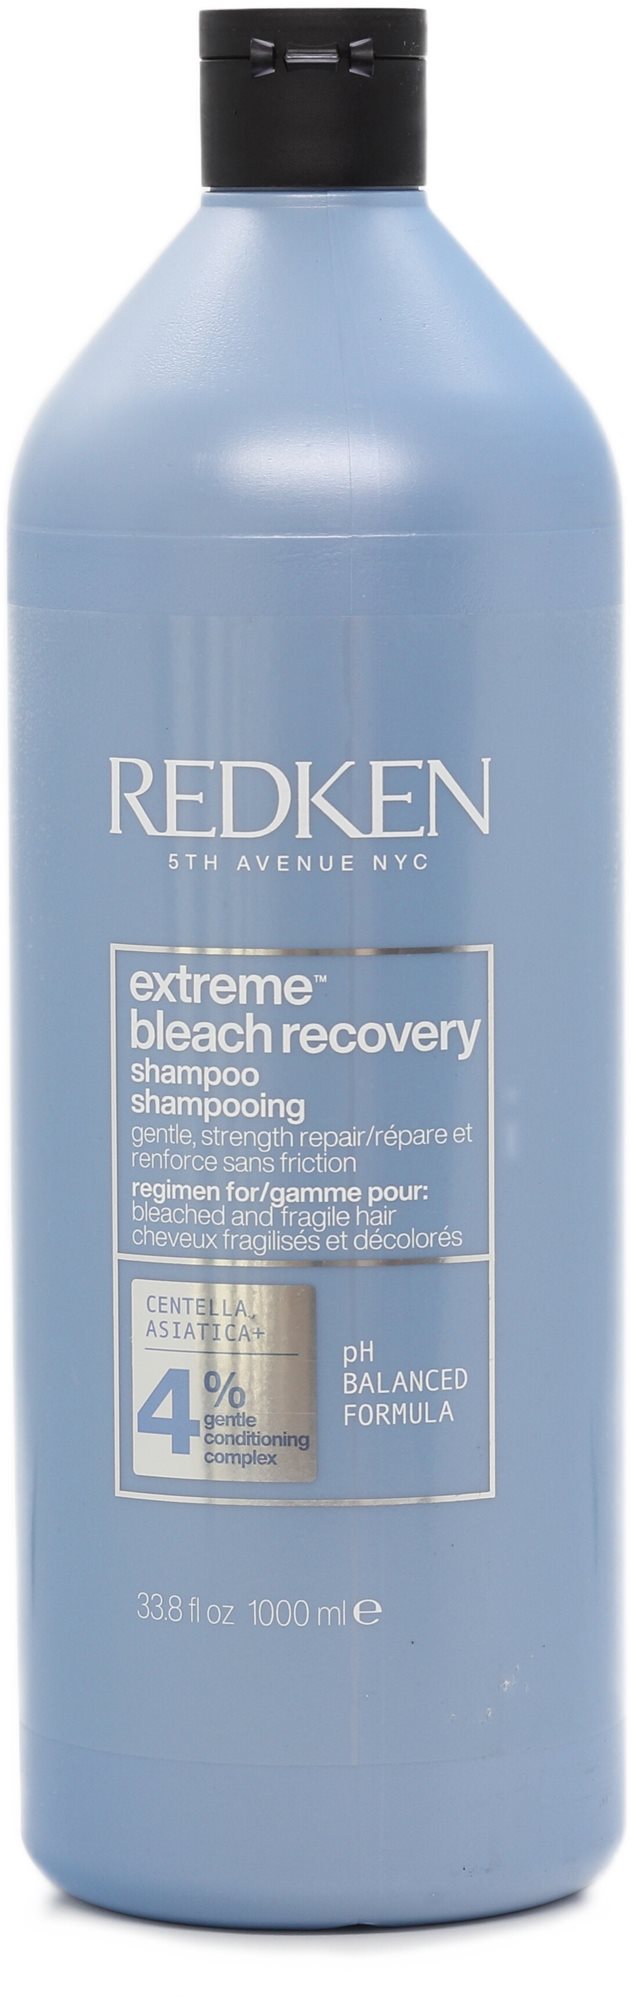 REDKEN Extreme Bleach Recovery Shampoo 1000 ml